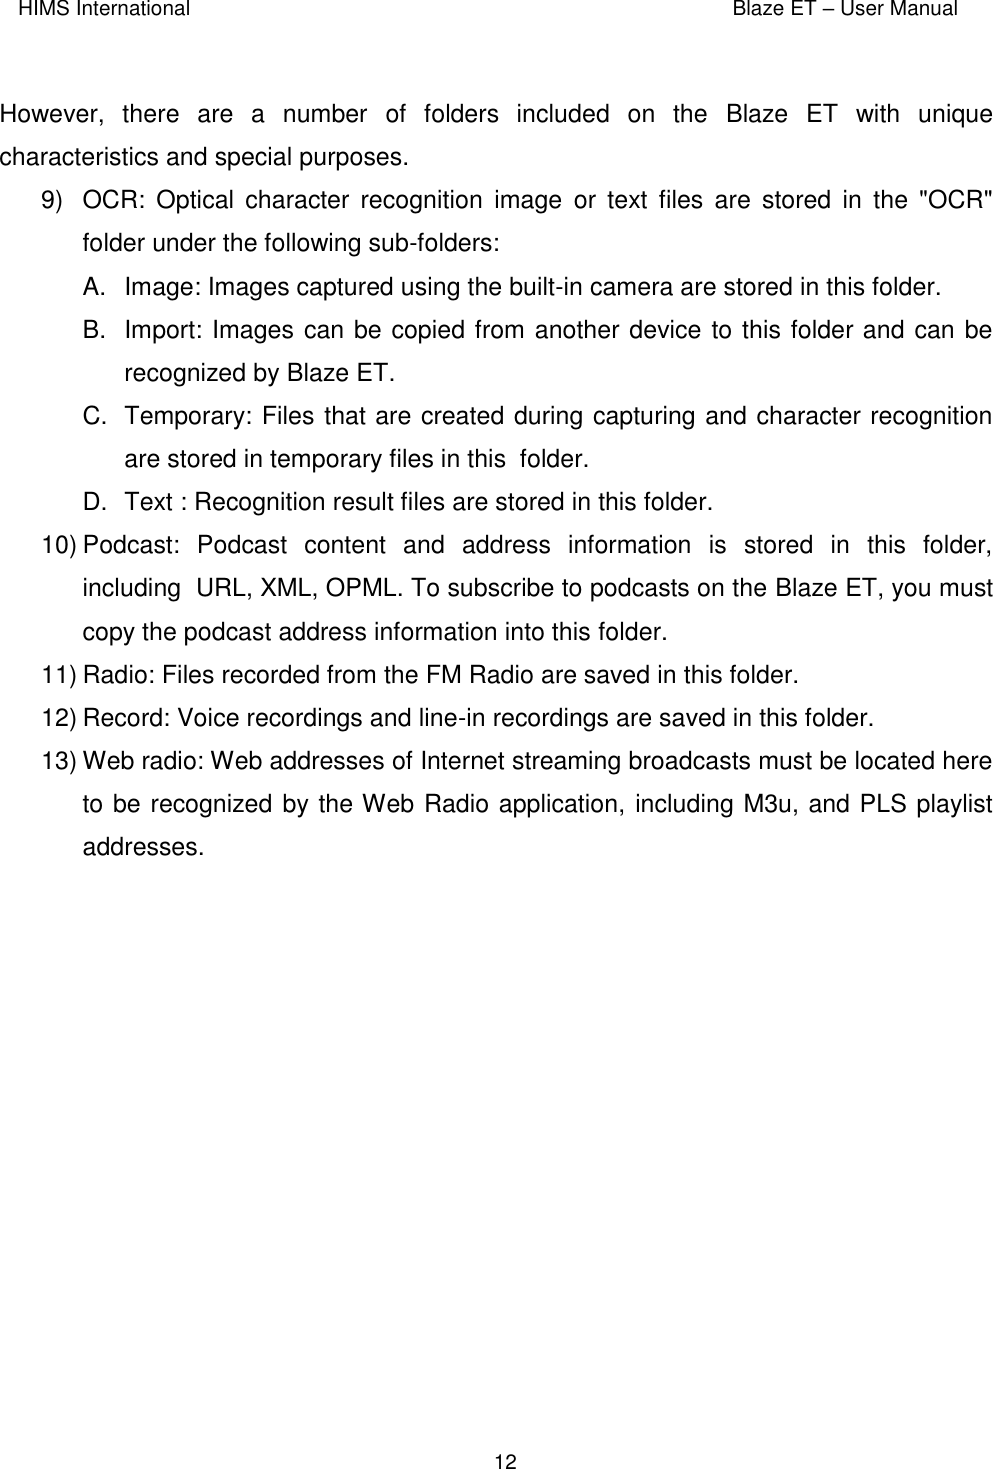 HIMS International    Blaze ET – User Manual      12  However,  there  are  a  number  of  folders  included  on  the  Blaze  ET  with  unique characteristics and special purposes. 9)  OCR:  Optical  character recognition  image  or  text  files  are  stored  in  the  &quot;OCR&quot; folder under the following sub-folders:  A.  Image: Images captured using the built-in camera are stored in this folder. B.  Import: Images can be copied from another device to this folder and can be recognized by Blaze ET.  C.  Temporary: Files that are created during capturing and character recognition are stored in temporary files in this  folder.  D.  Text : Recognition result files are stored in this folder.  10) Podcast:  Podcast  content  and  address  information  is  stored  in  this  folder, including  URL, XML, OPML. To subscribe to podcasts on the Blaze ET, you must copy the podcast address information into this folder. 11) Radio: Files recorded from the FM Radio are saved in this folder.  12) Record: Voice recordings and line-in recordings are saved in this folder. 13) Web radio: Web addresses of Internet streaming broadcasts must be located here to be recognized by the Web Radio application, including M3u, and PLS playlist addresses.   